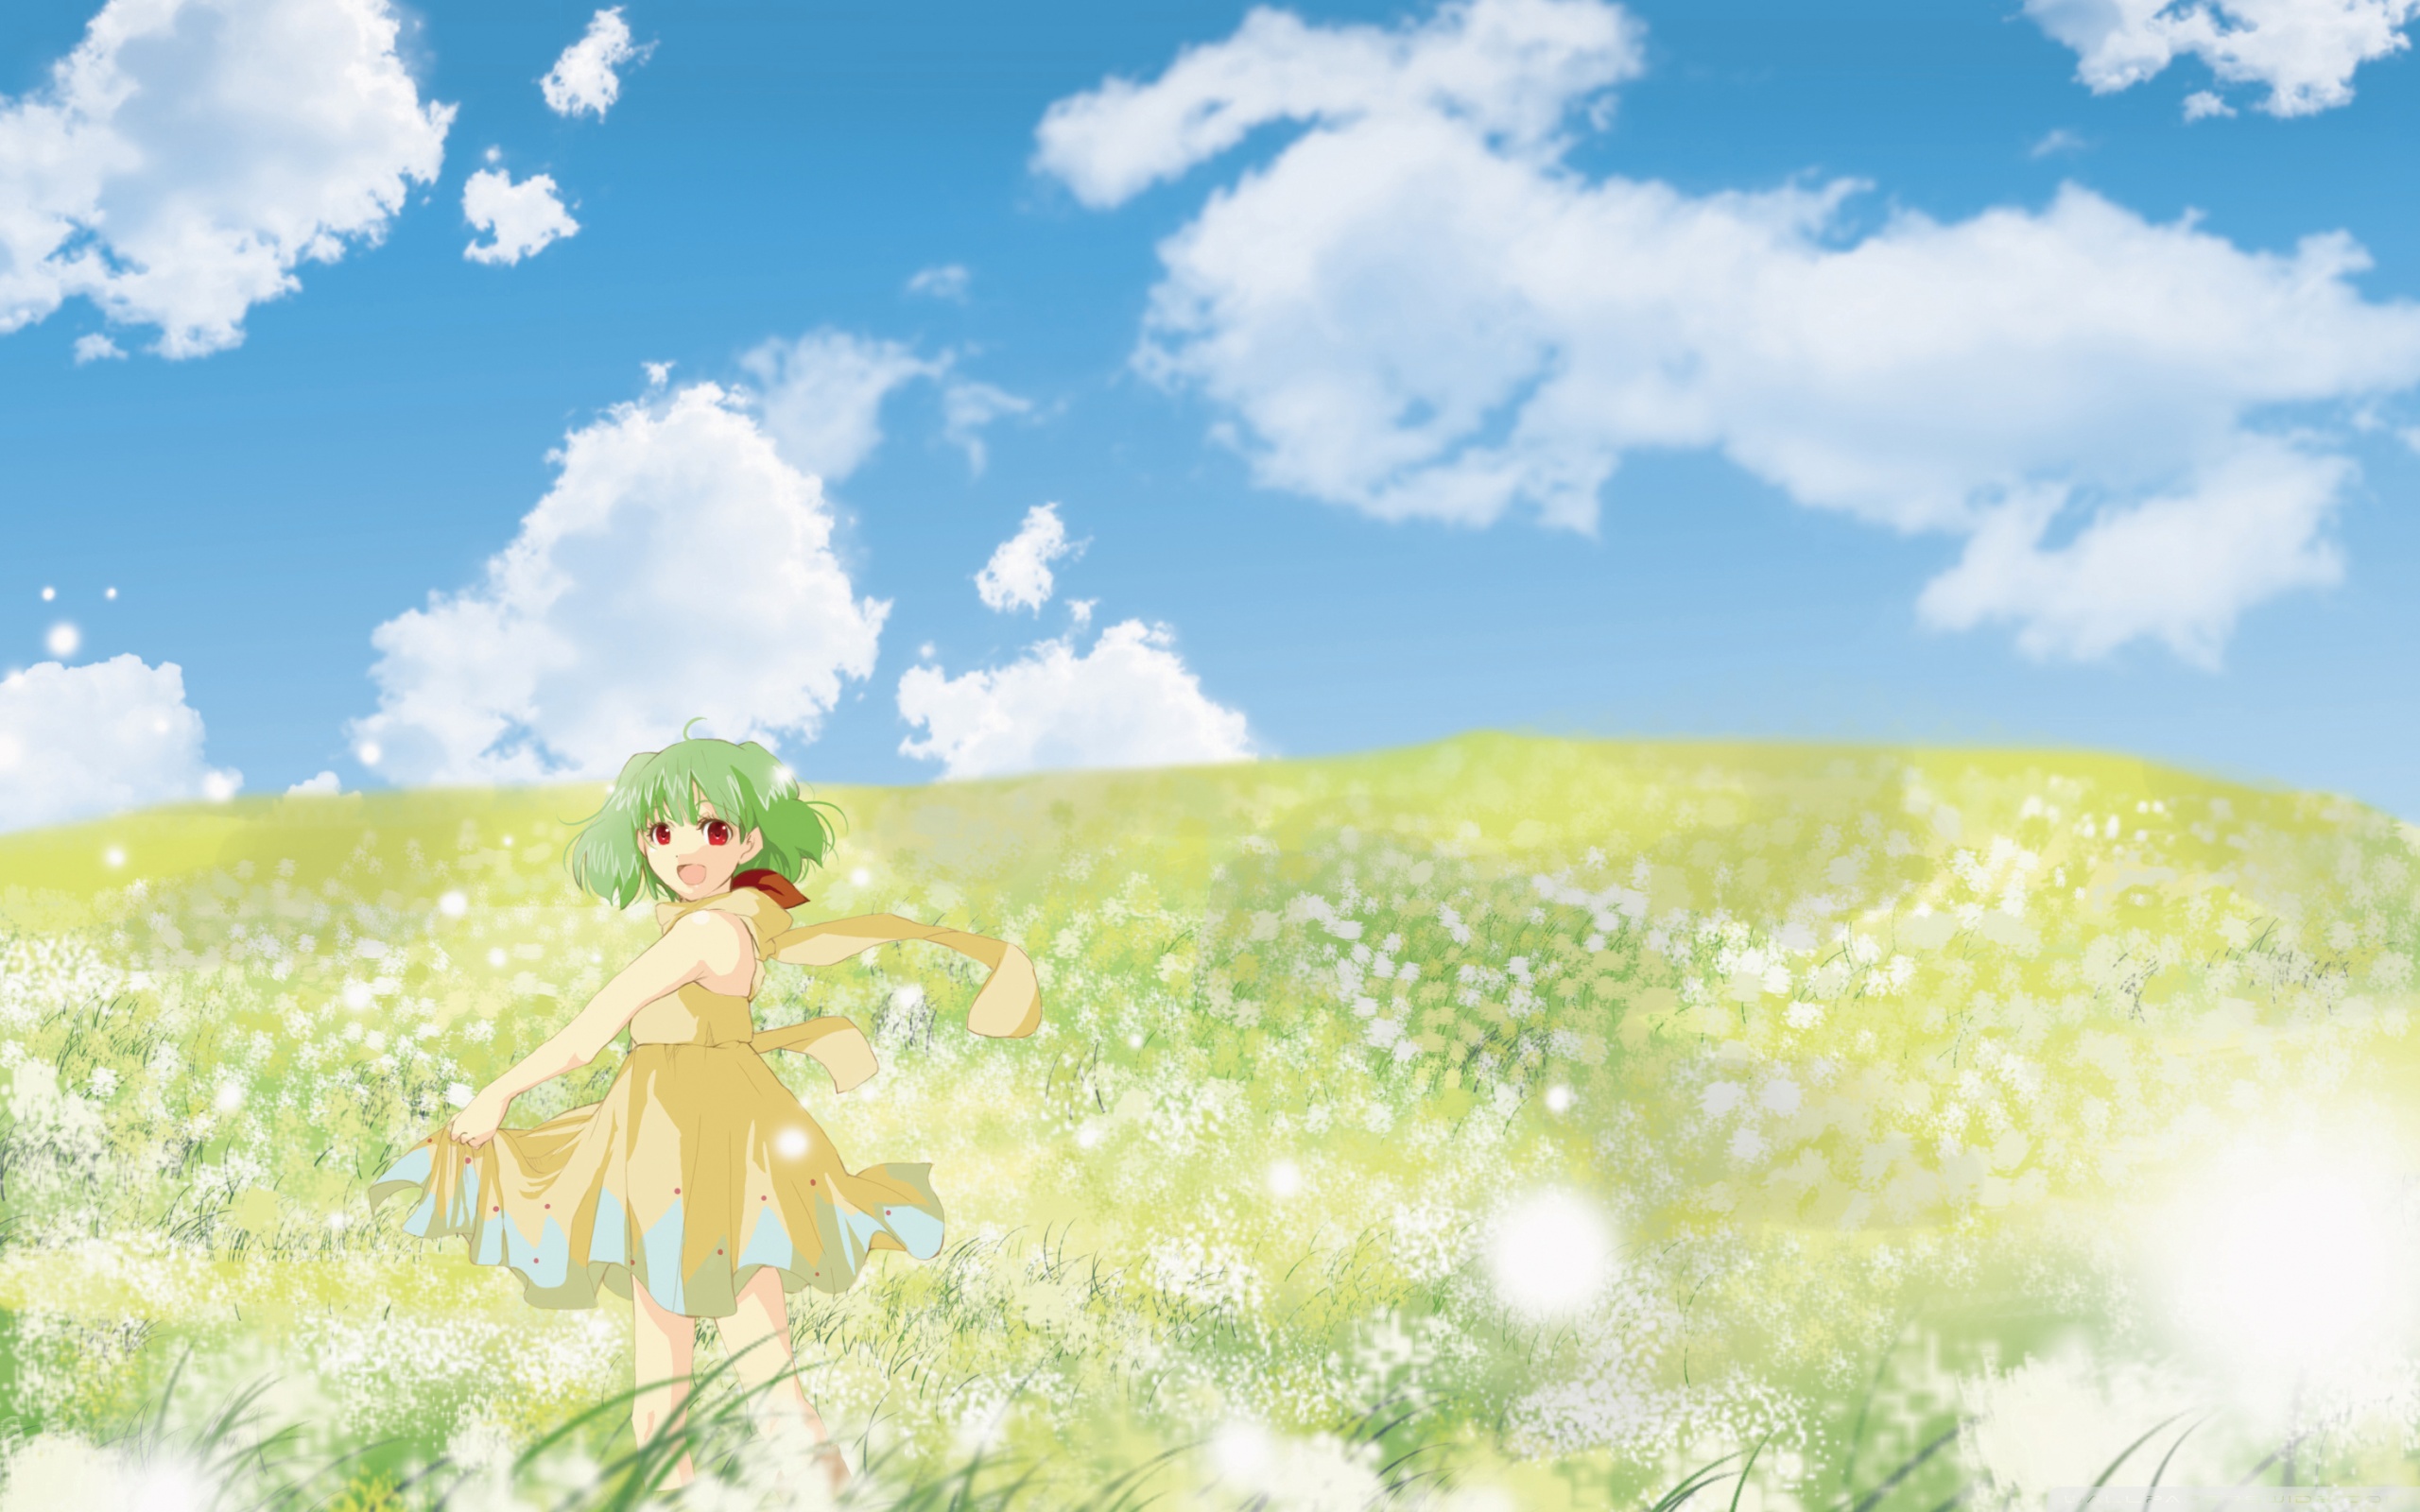 Anime Girl In Flower Field Ultra Hd Desktop Background Wallpaper For 4k Uhd Tv Tablet Smartphone We hope you enjoy our growing collection of hd images to use as a background or home screen for your smartphone or please contact us if you want to publish an anime flower wallpaper on our site. wallpaperswide com